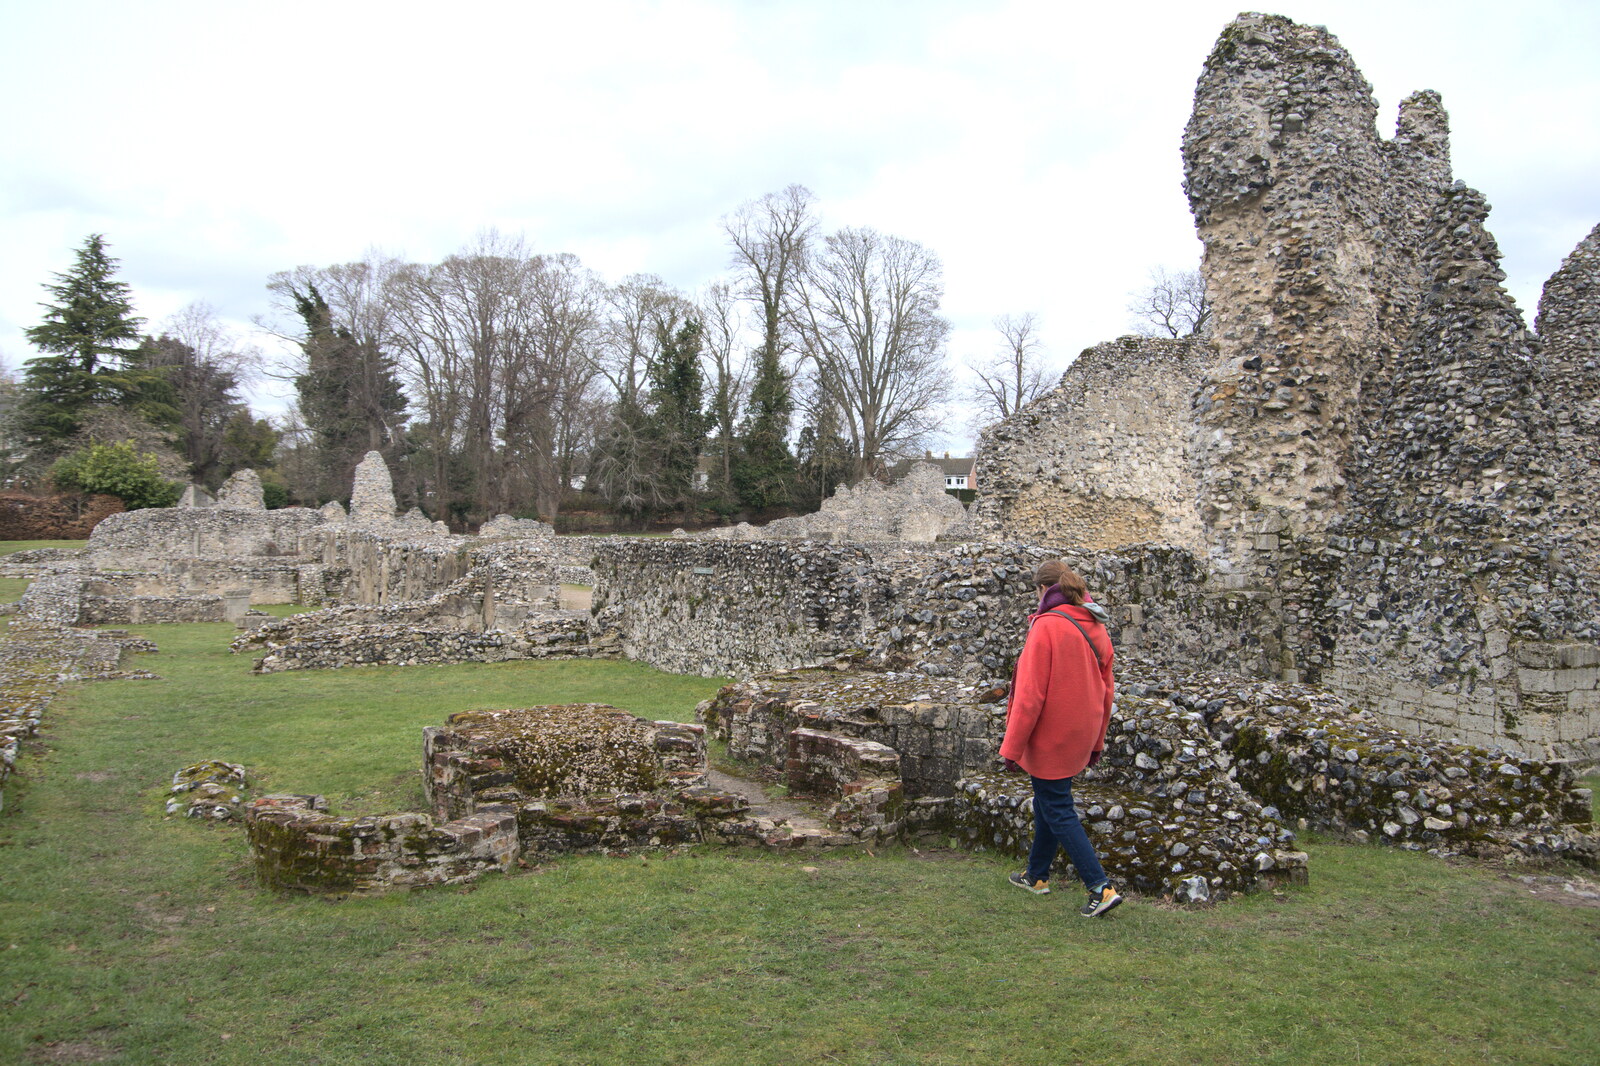 Isobel looks at some more ruins from A Postcard from Thetford, Norfolk - 15th March 2023